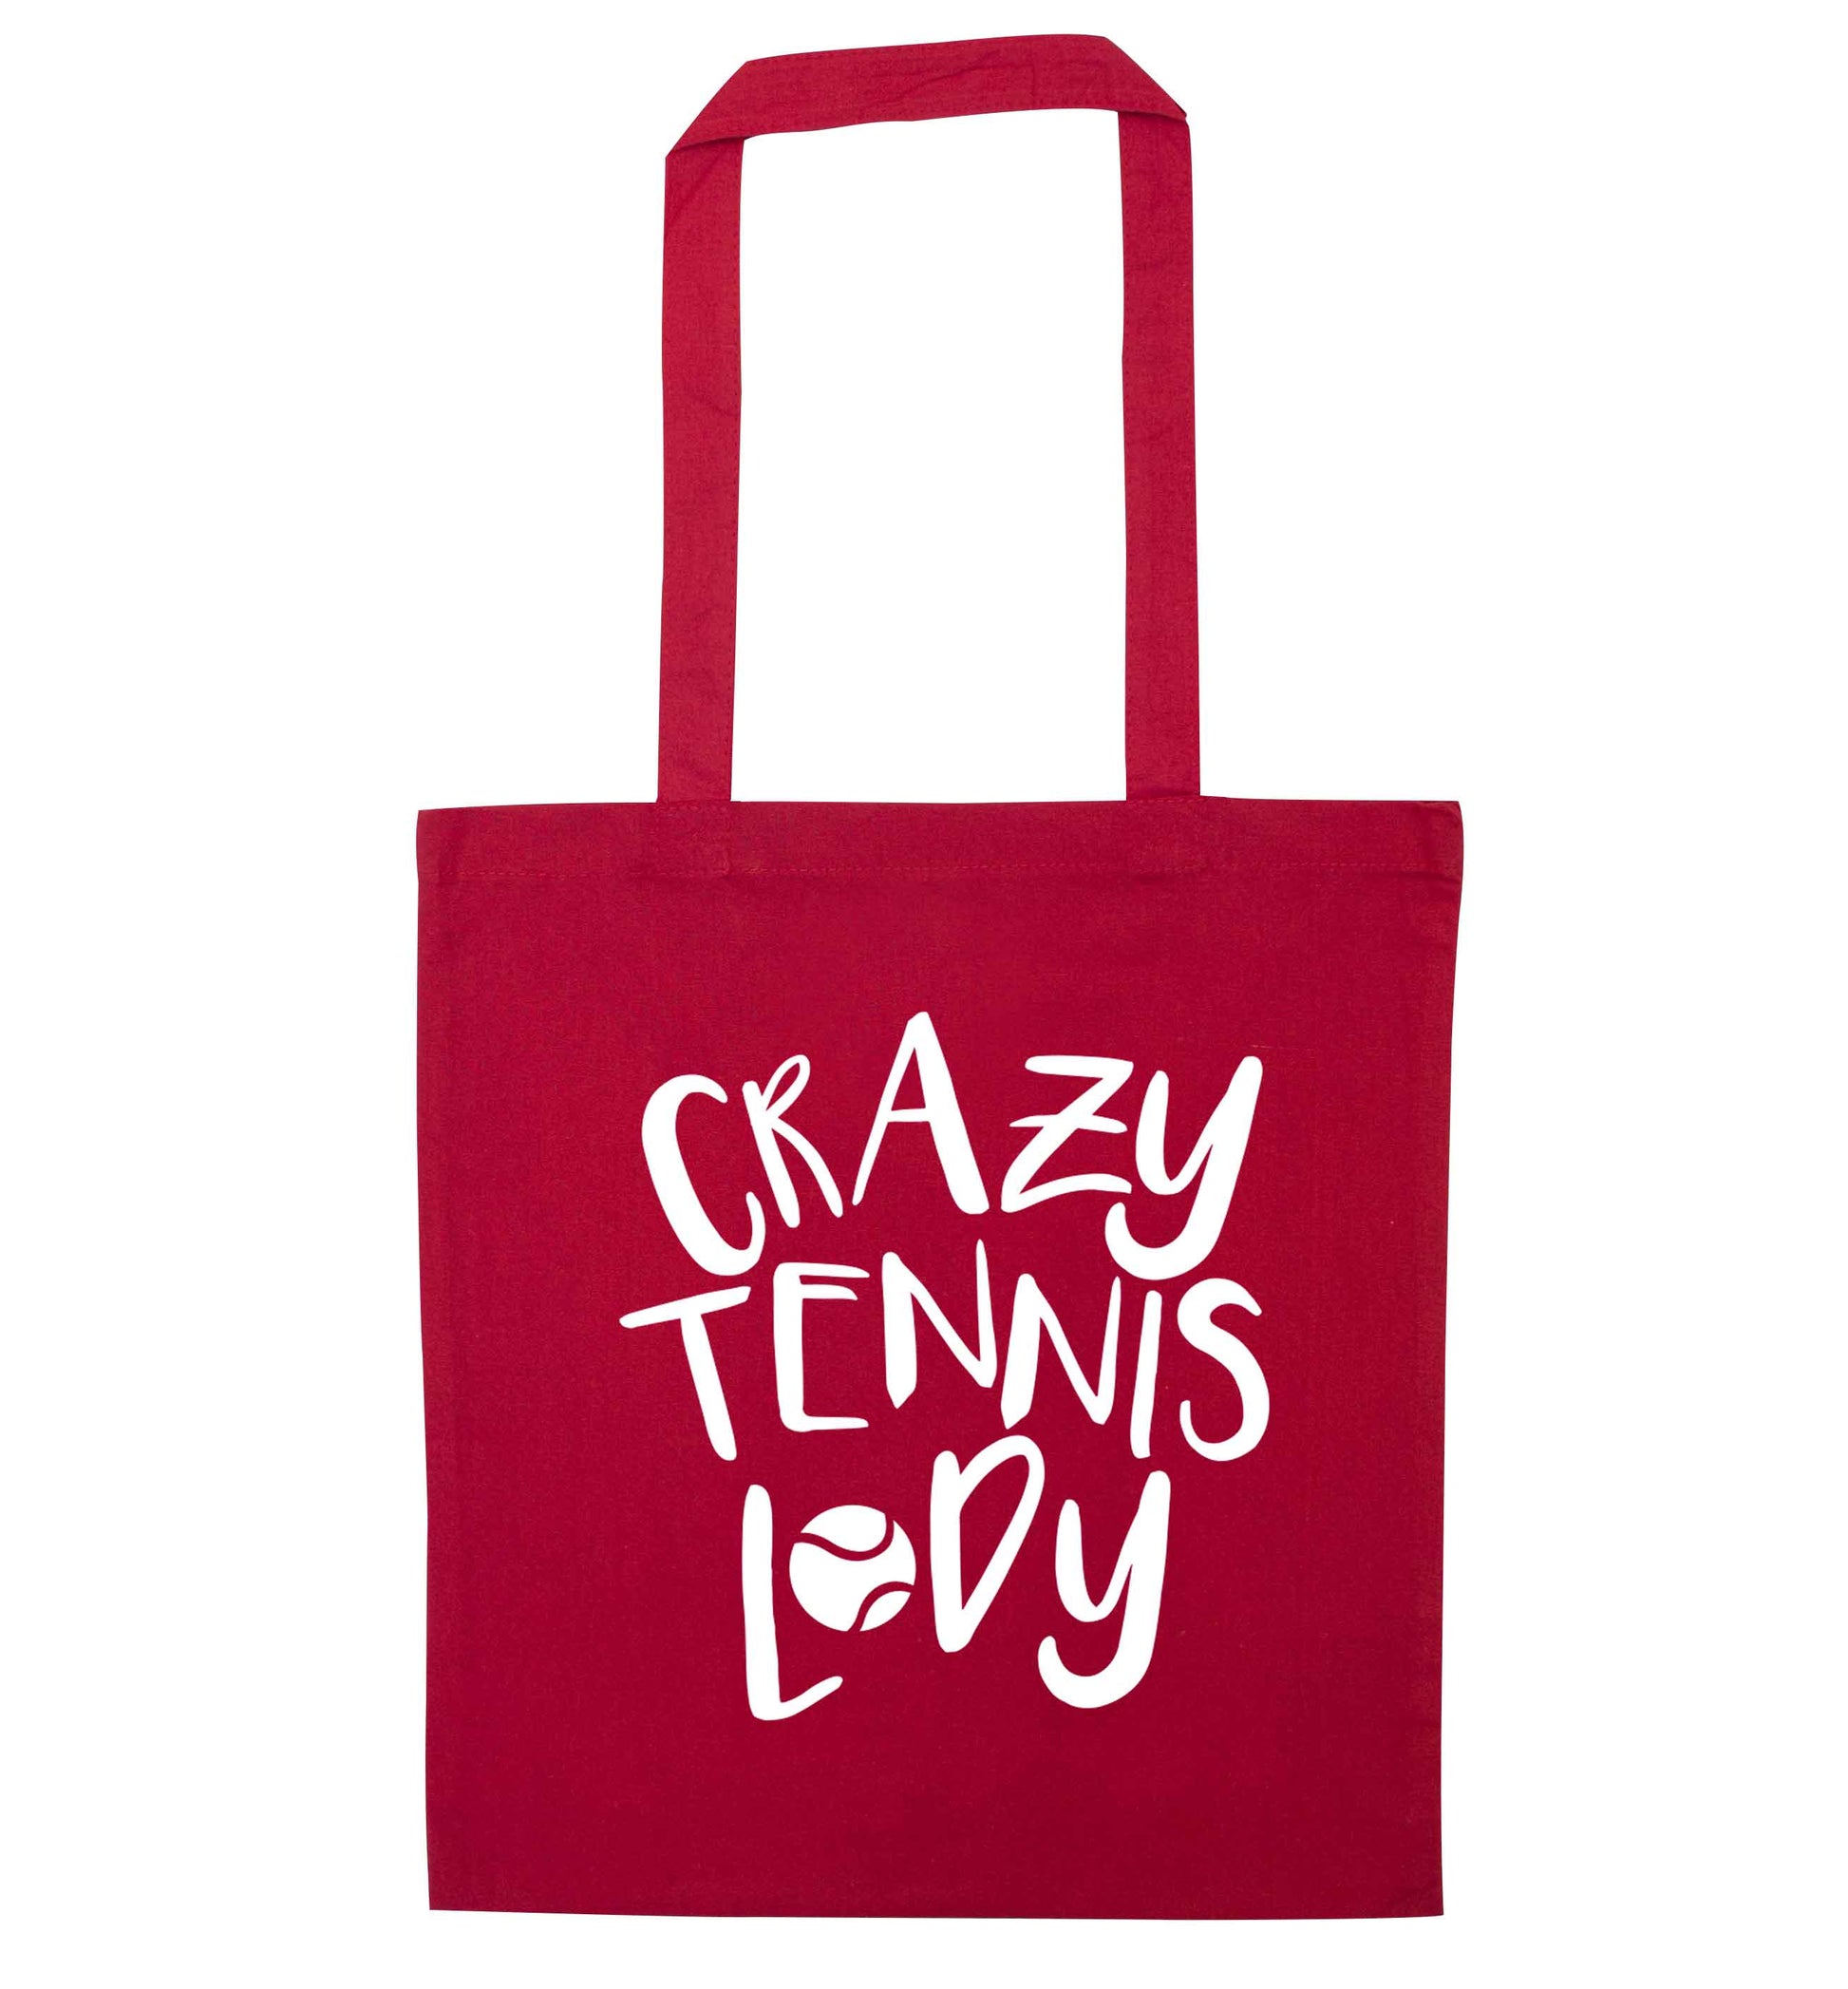 Crazy tennis lady red tote bag